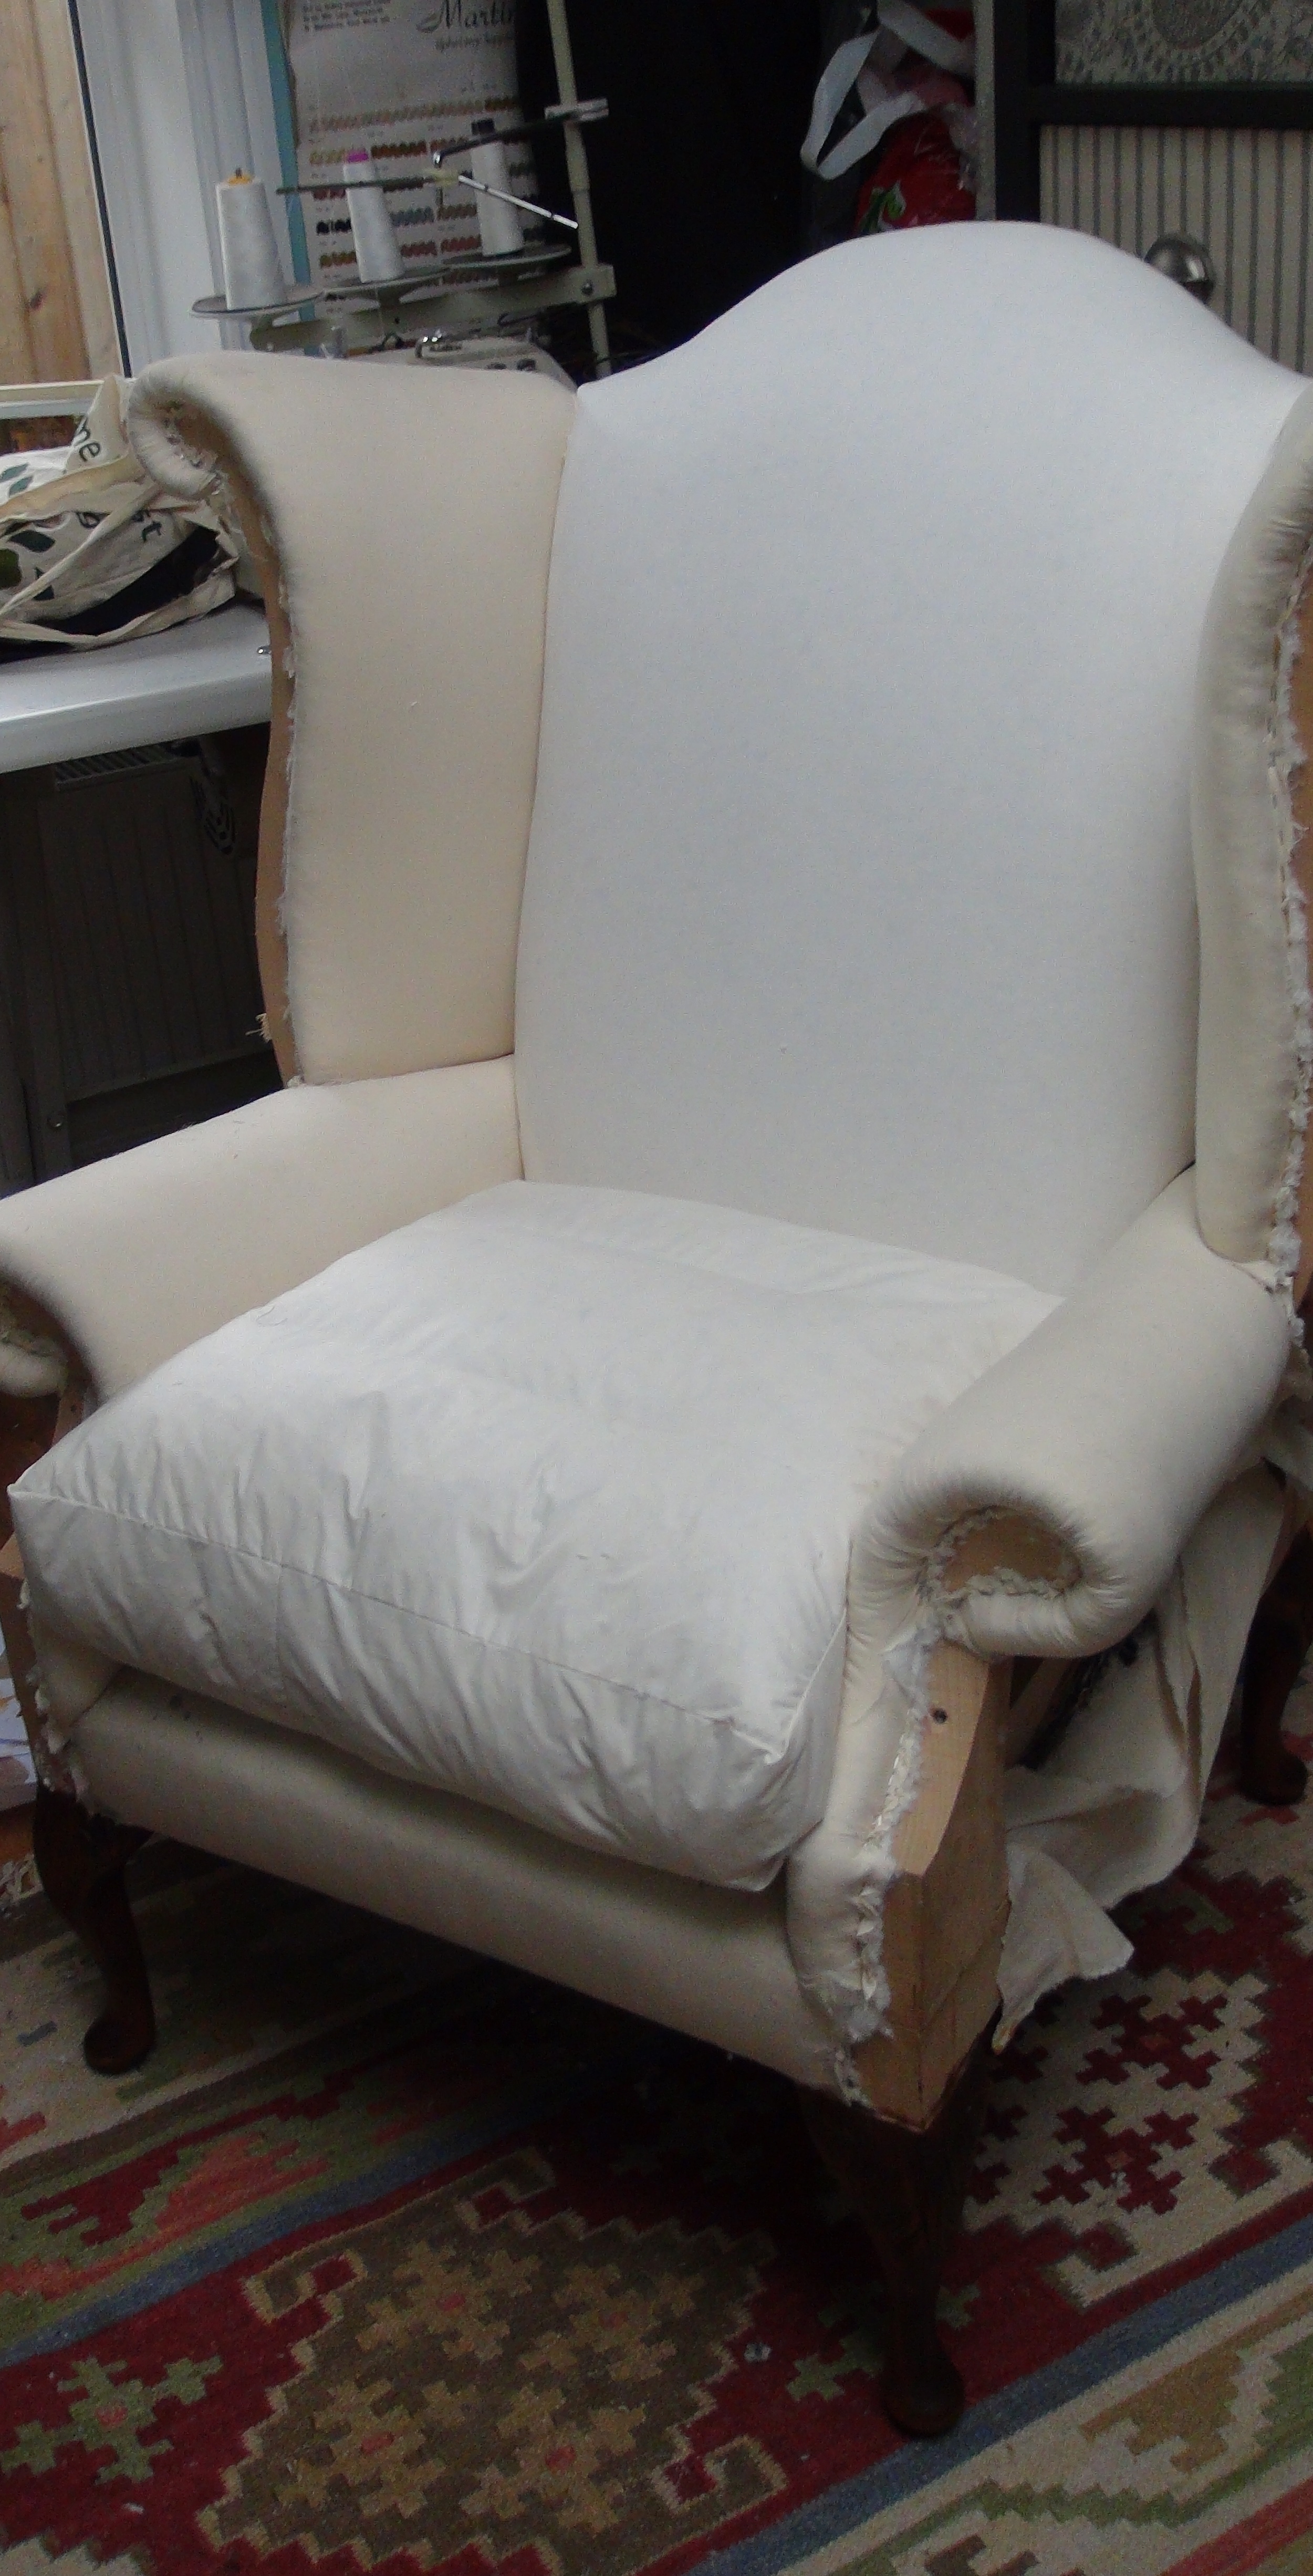  Cushions are&nbsp;a luxurious mix of feather and down&nbsp; within a calico case with optional core. Chairs and chaise longues are finished in calico prior to top cover 